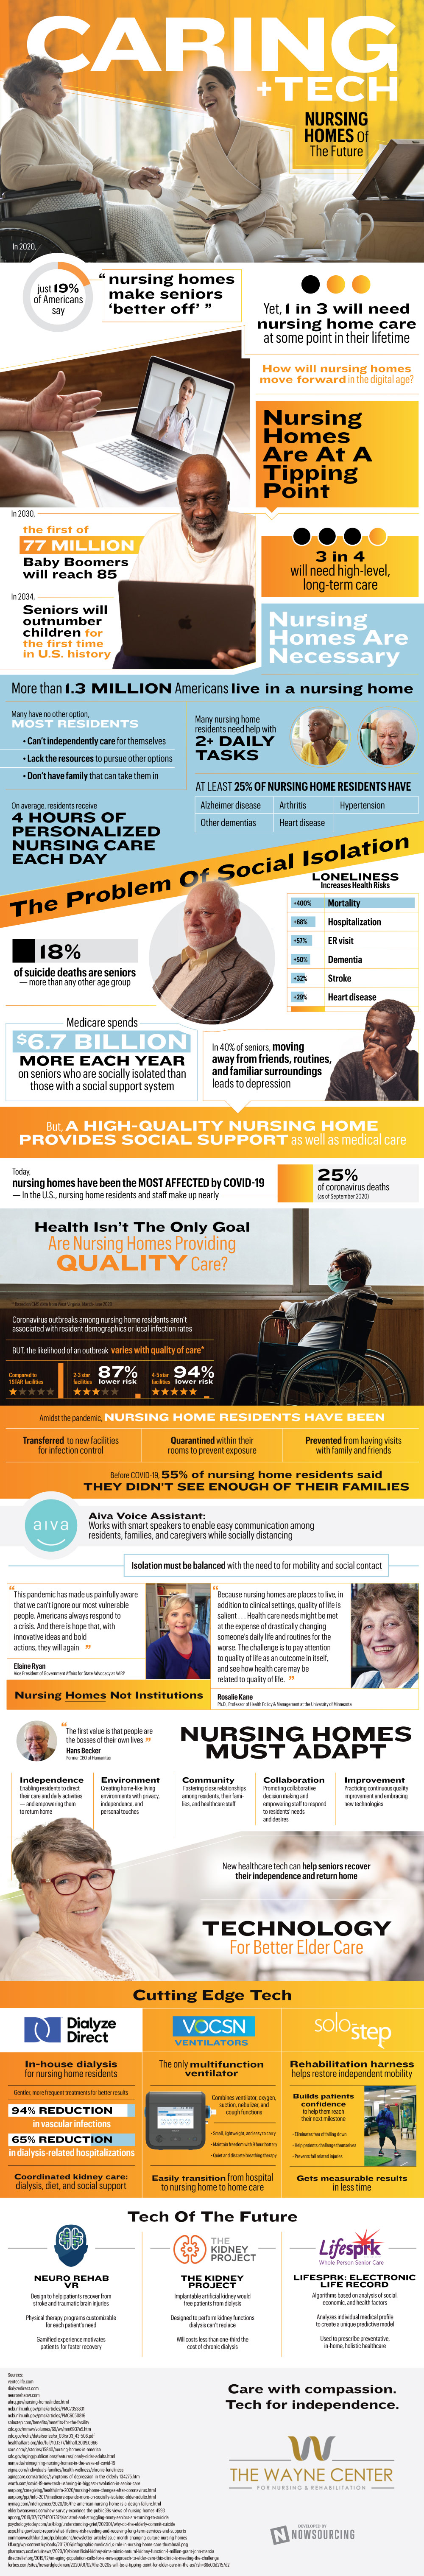 the future of nursing homes (infographic)